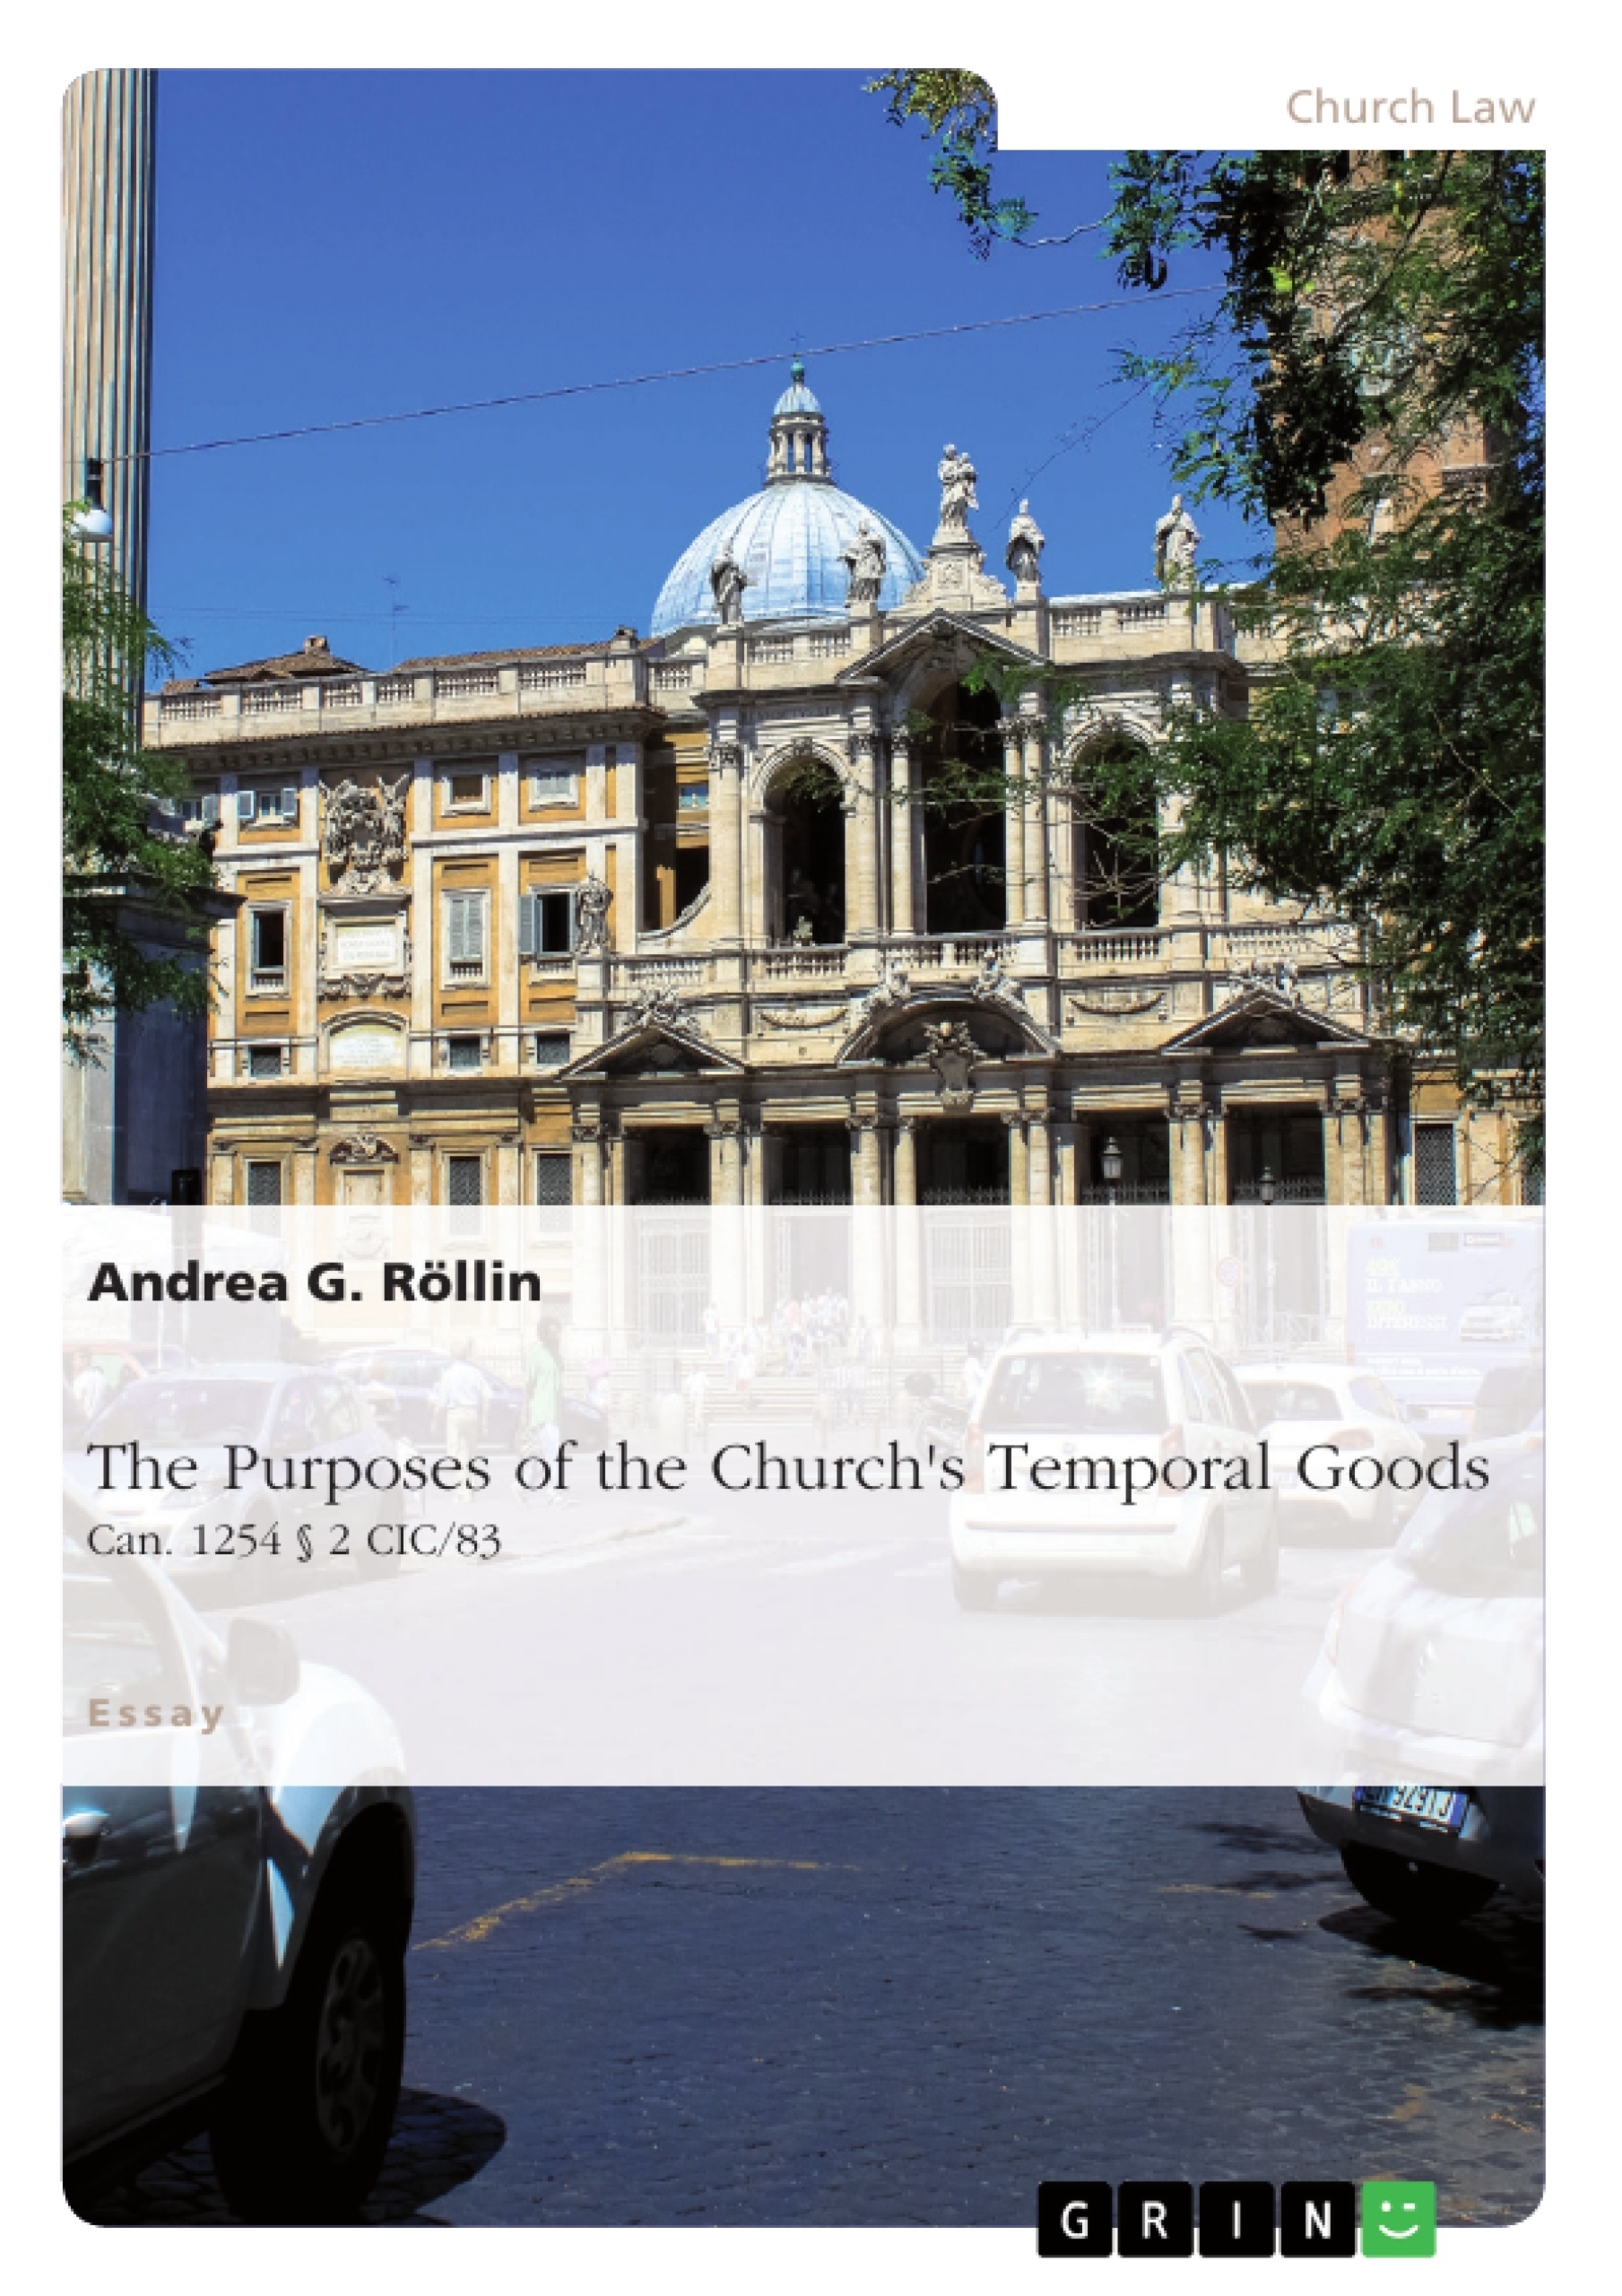 Title: The Purposes of the Church's Temporal Goods (Can. 1254 § 2 CIC/83)